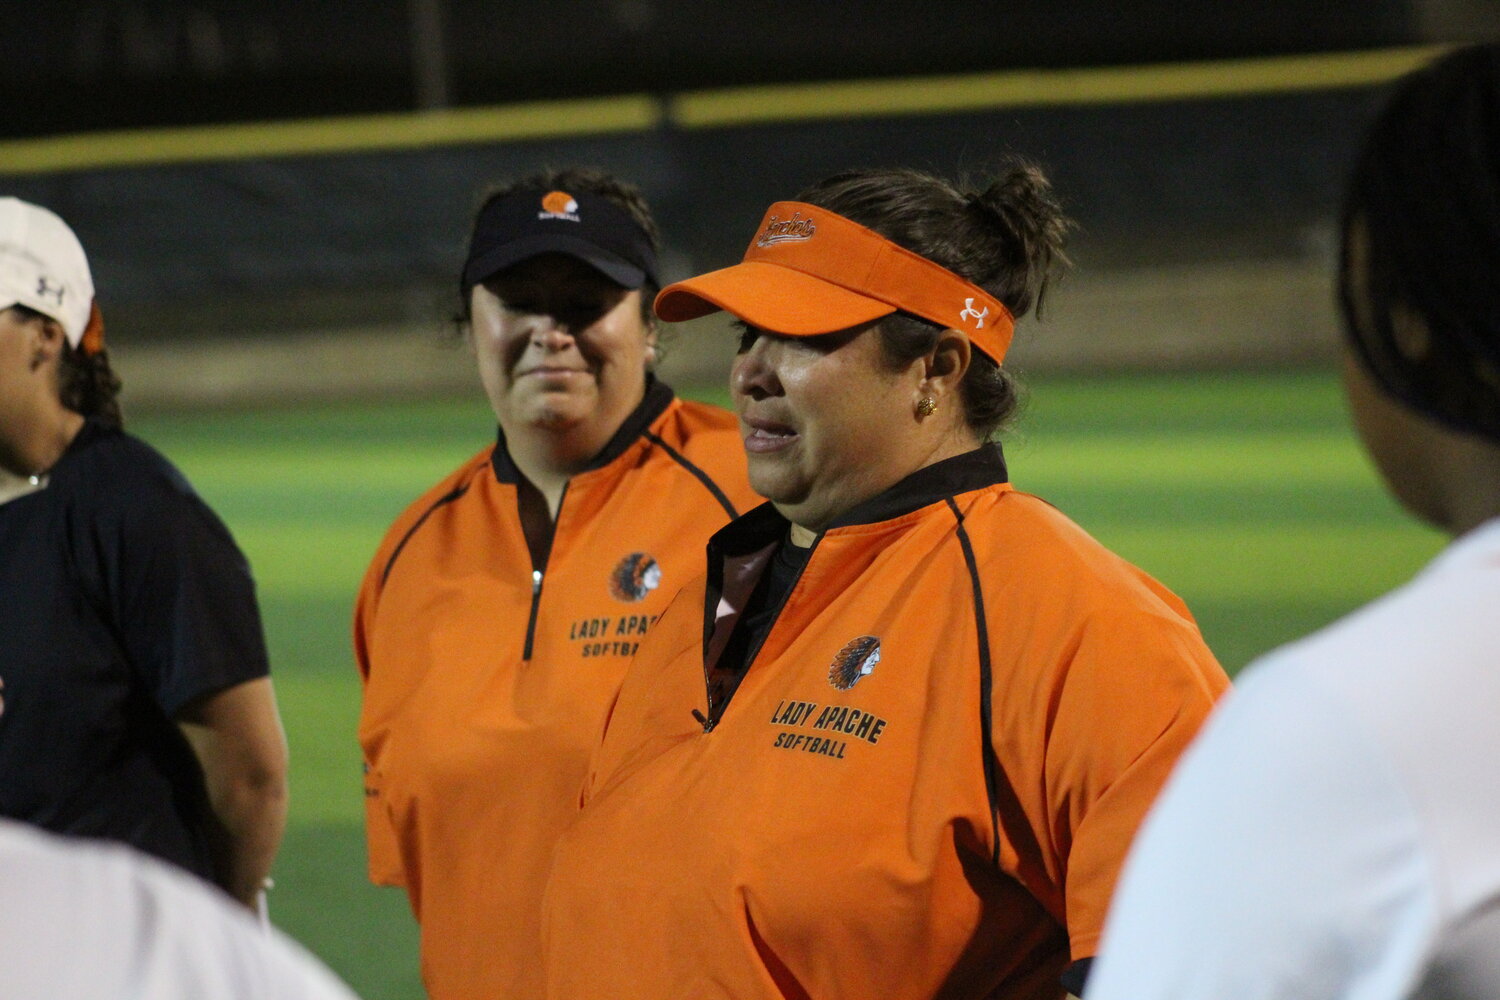 Lady Apaches head softball coach Michelle Uribe speaks to her players after the area round loss to Needville. Uribe in her second year turned the Lady Apaches from 9-22 (4-6 fourth place district) to a 21-10 (7-3 second place district) team.